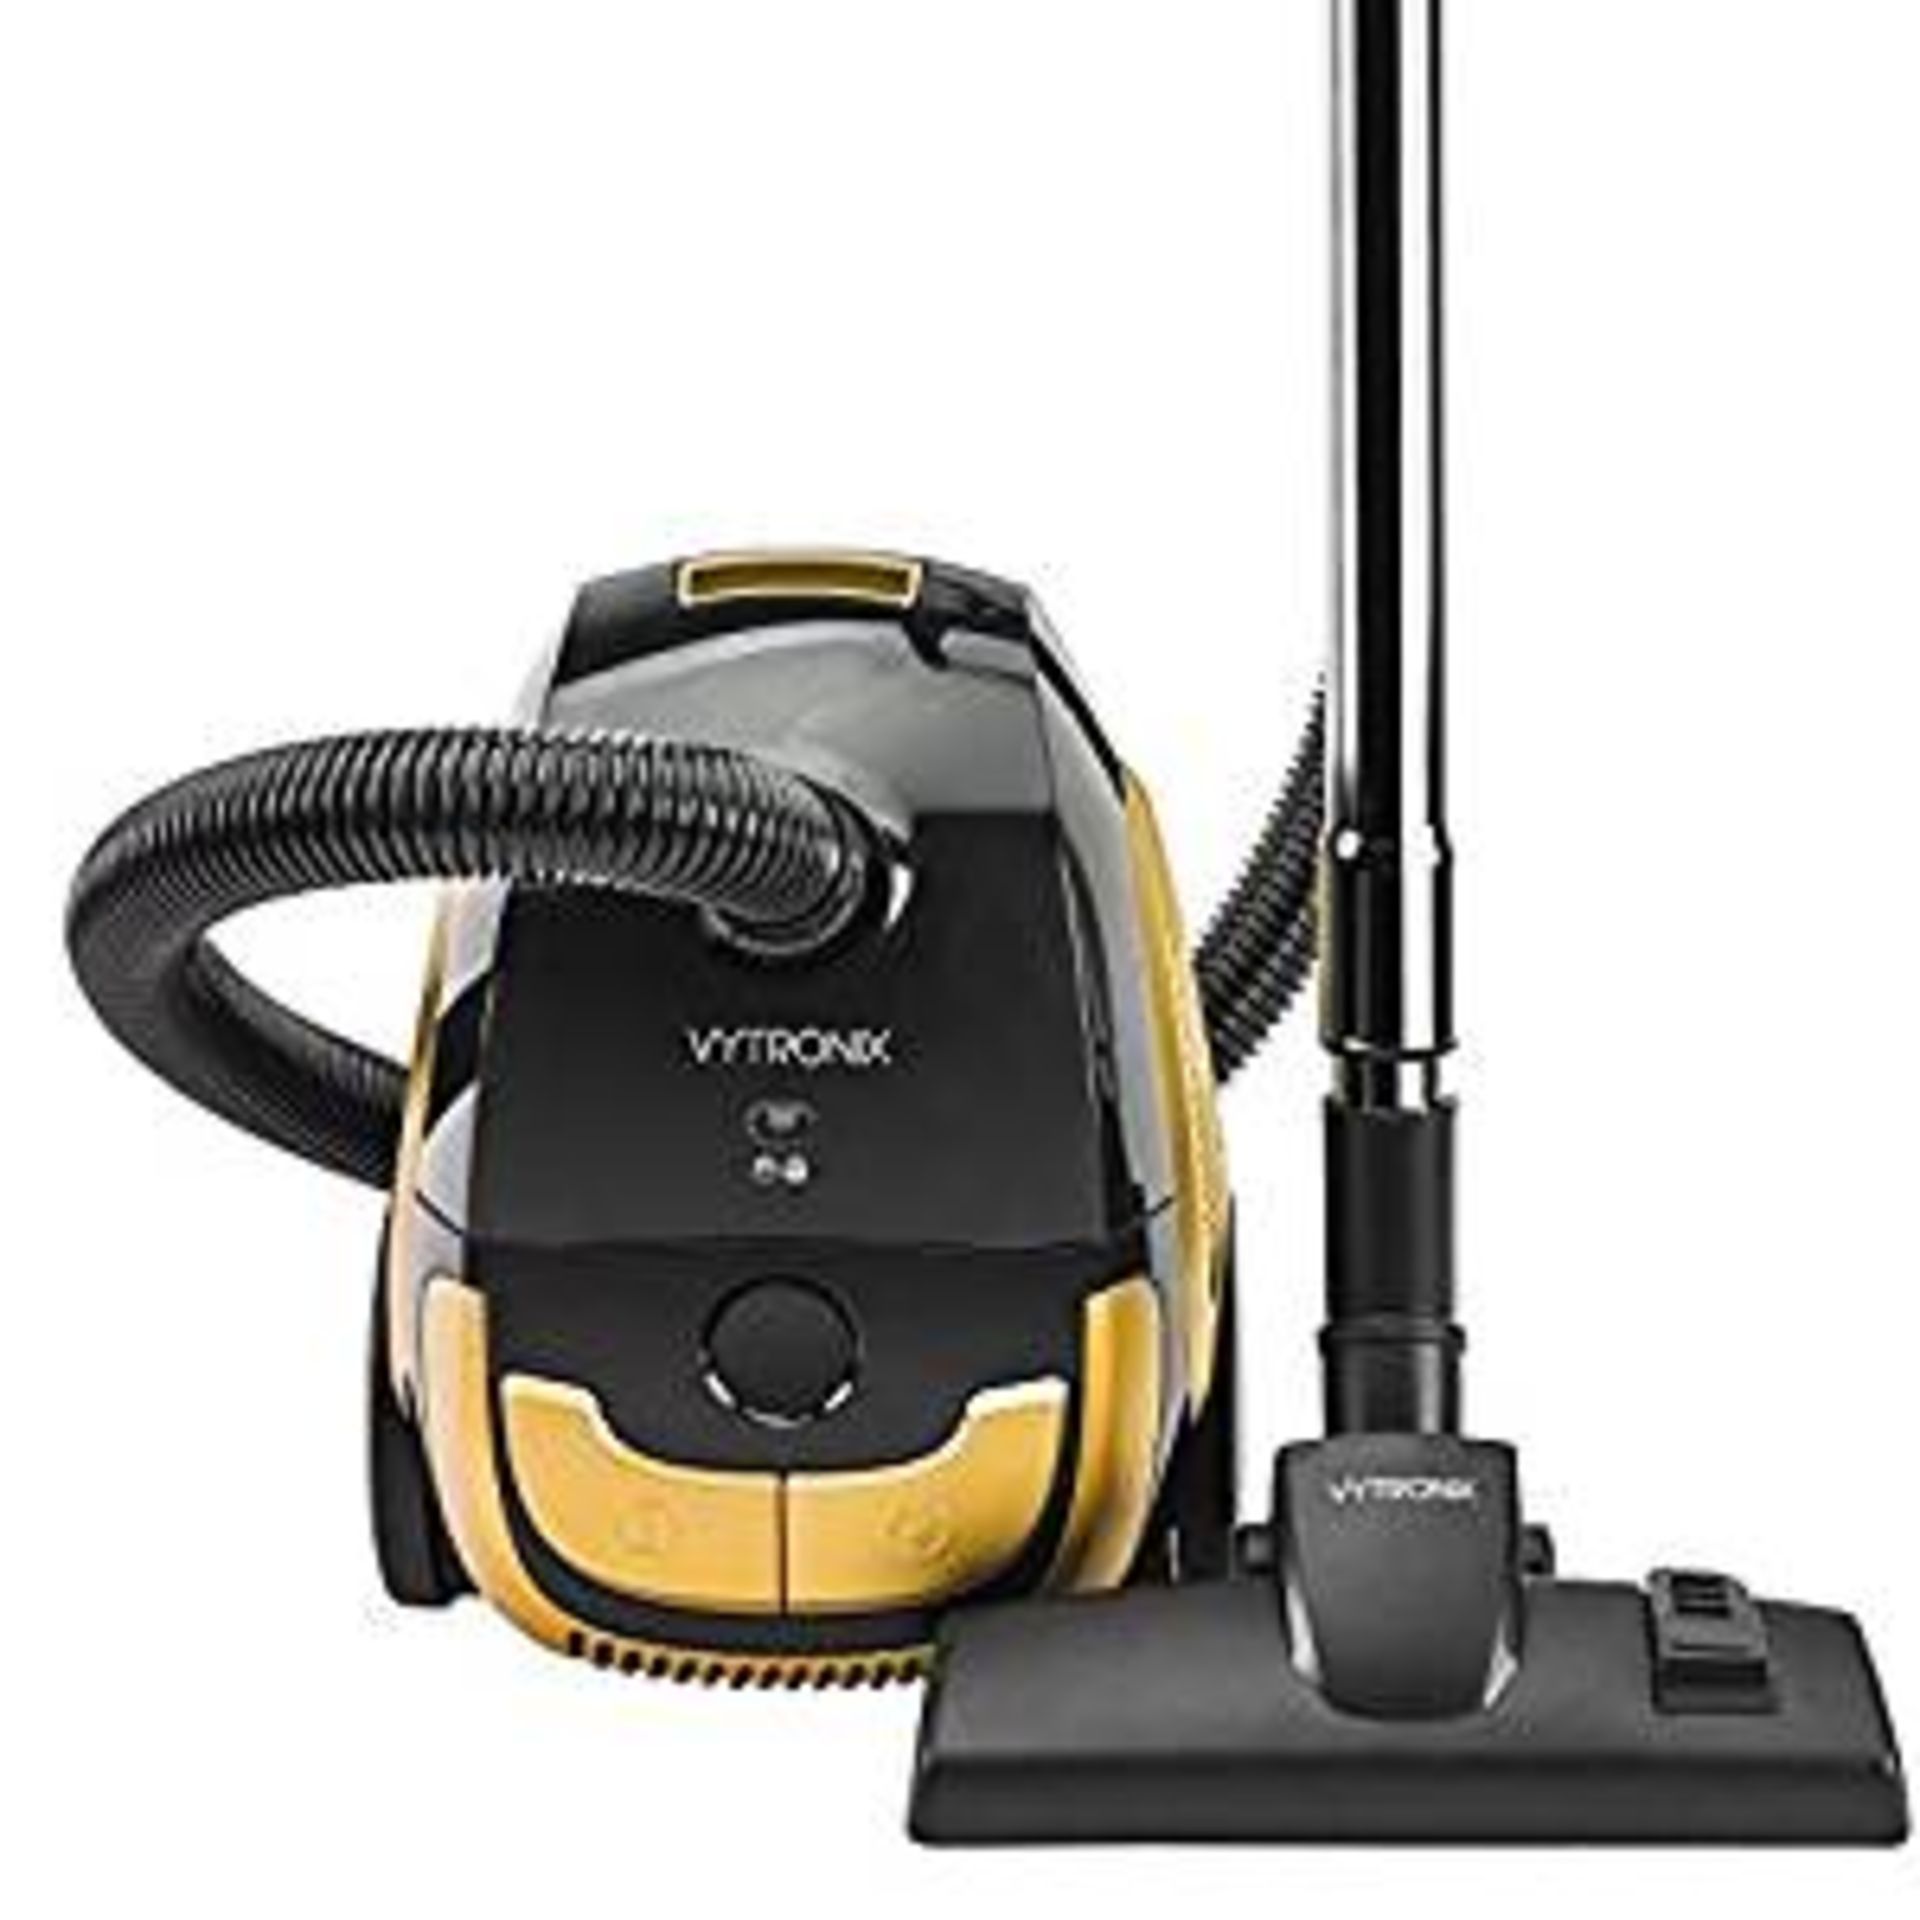 VYTRONIX BGGC01 1200w Compact Powerful Bagged Cylinder Vacuum Cleaner Hoover